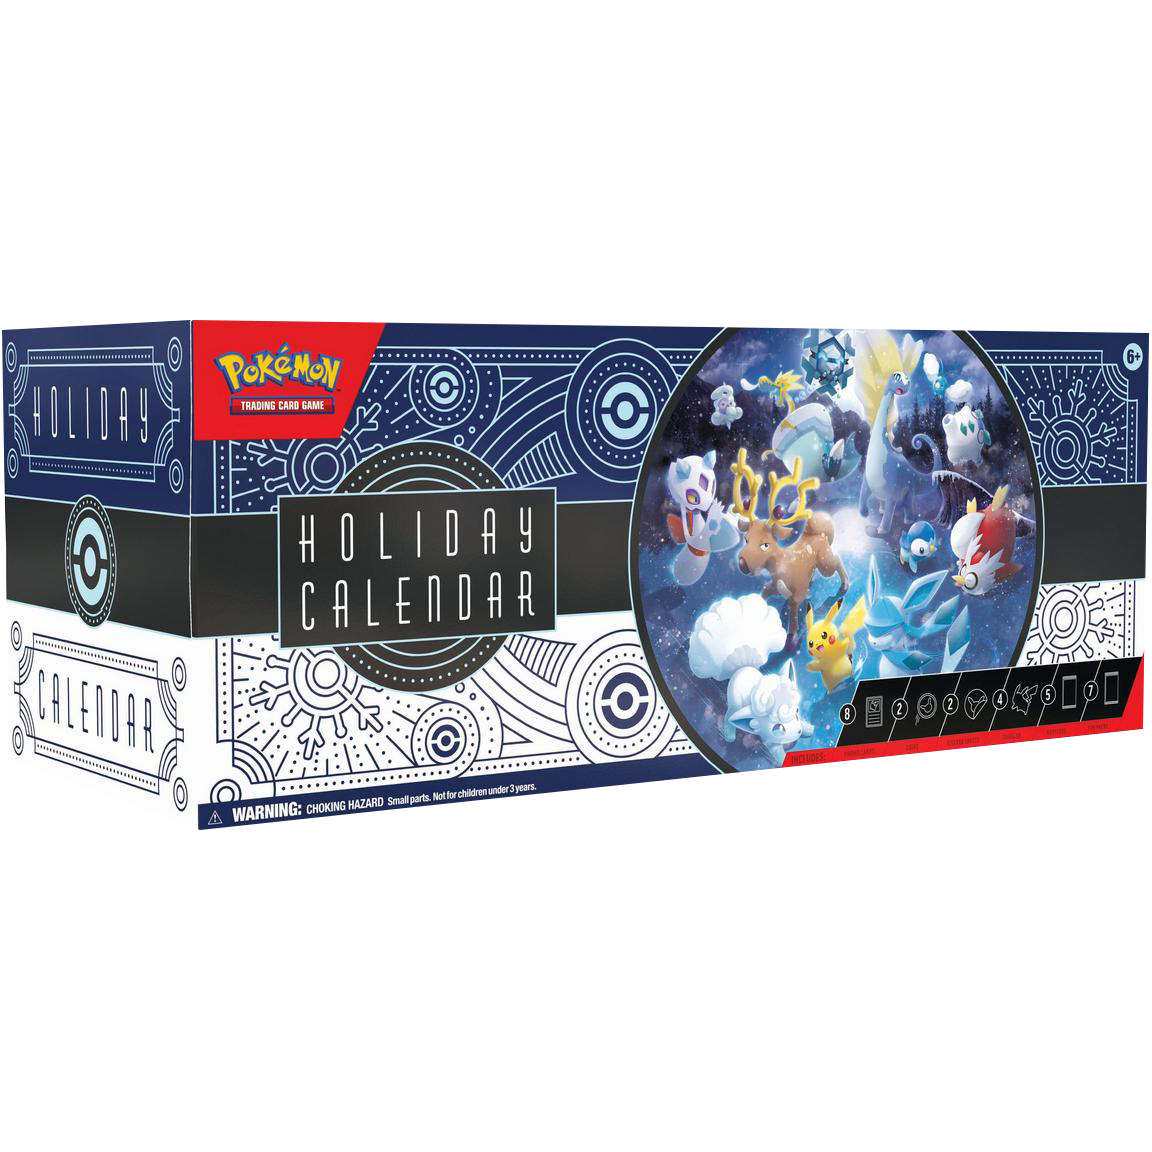 Pokemon Trading Card Game: Holiday Advent Calendar 2023 - 25 Days of Suprises - Includes Stamped Promo Cards, Packs & More!